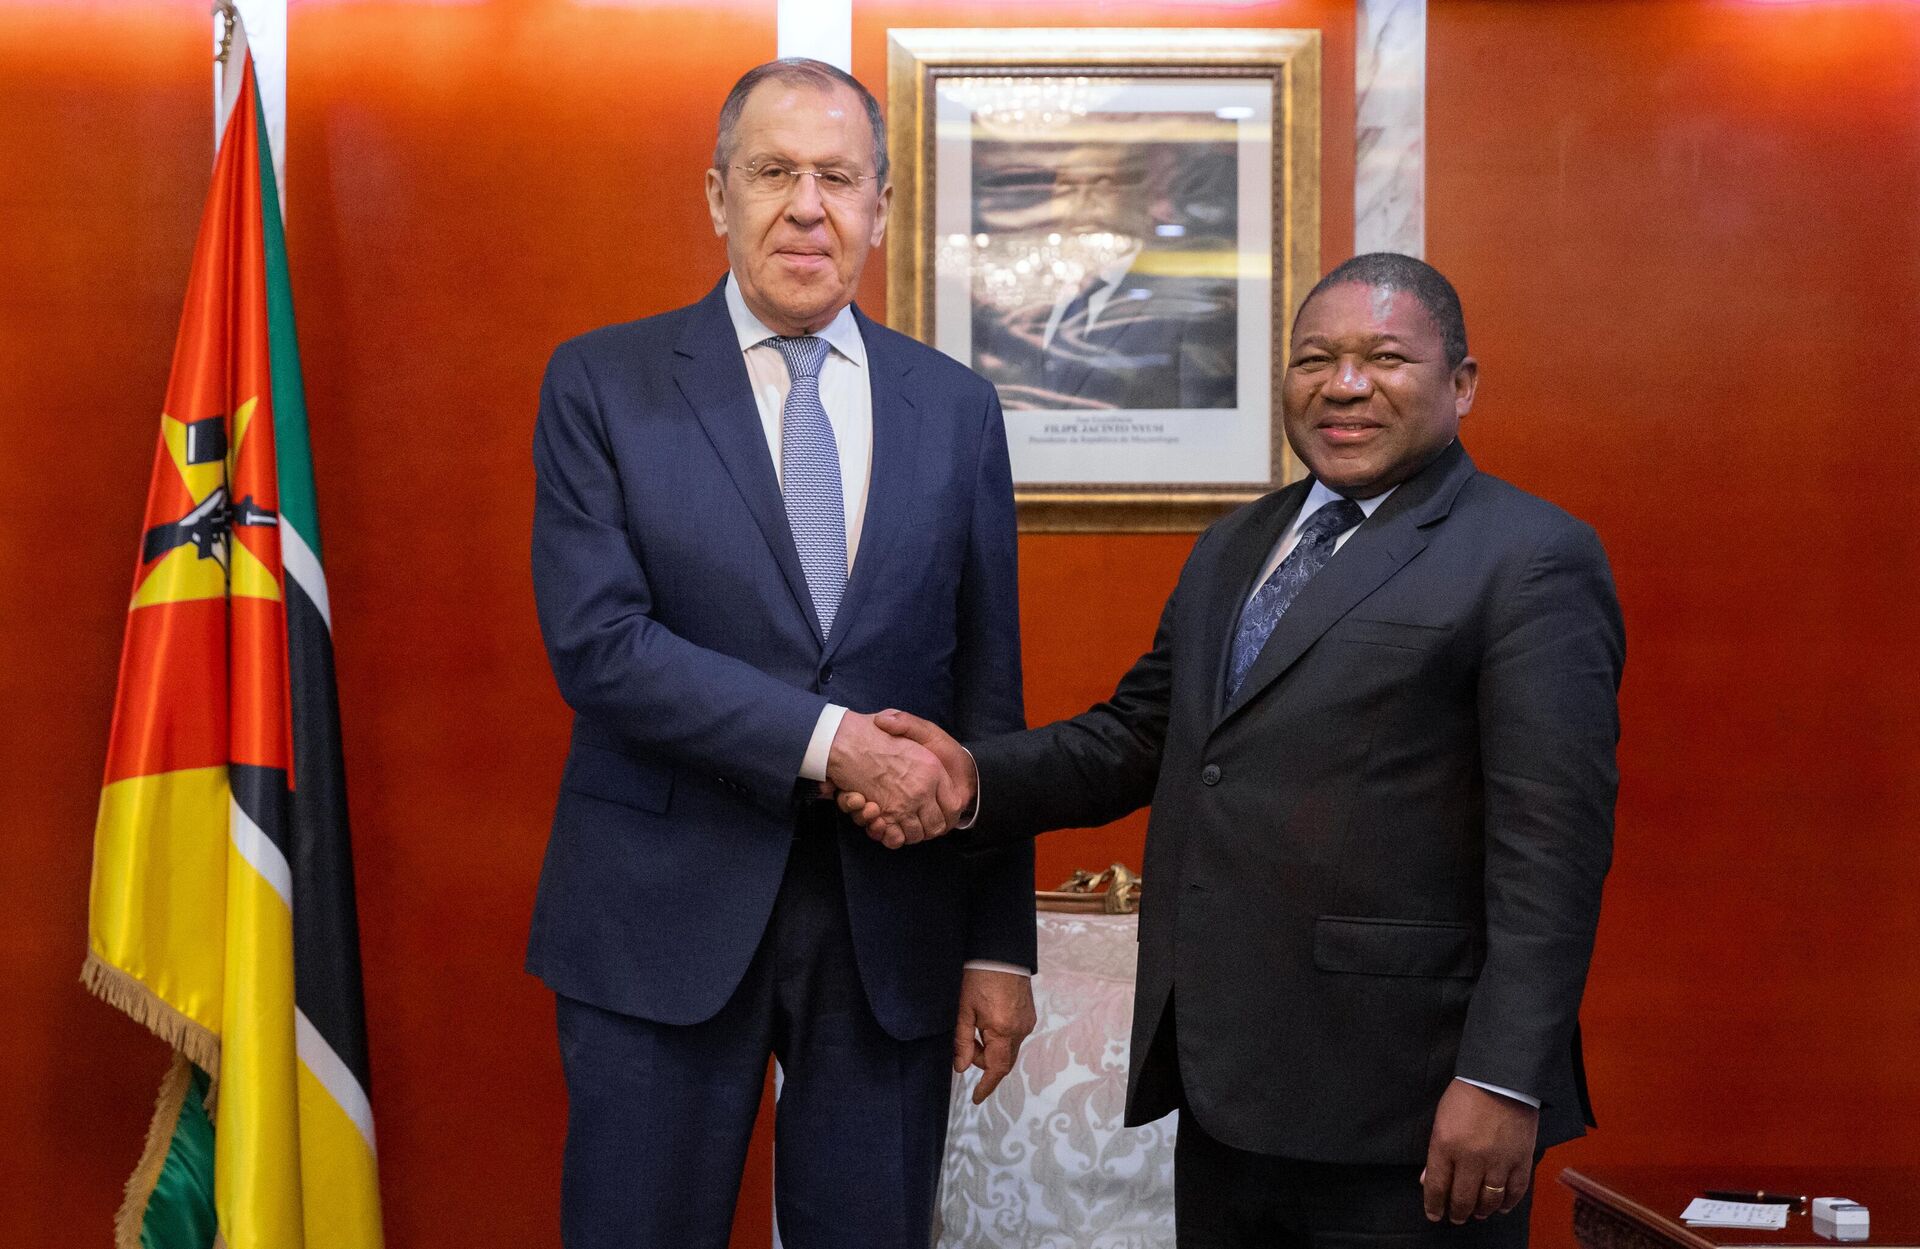 In this handout photo released by the Russian Foreign Ministry, Russian Foreign Minister Sergey Lavrov and Mozambique's President Filipe Jacinto Nyusi shake hands during a meeting at the presidential palace, in Maputo, Mozambique. - Sputnik International, 1920, 03.06.2023